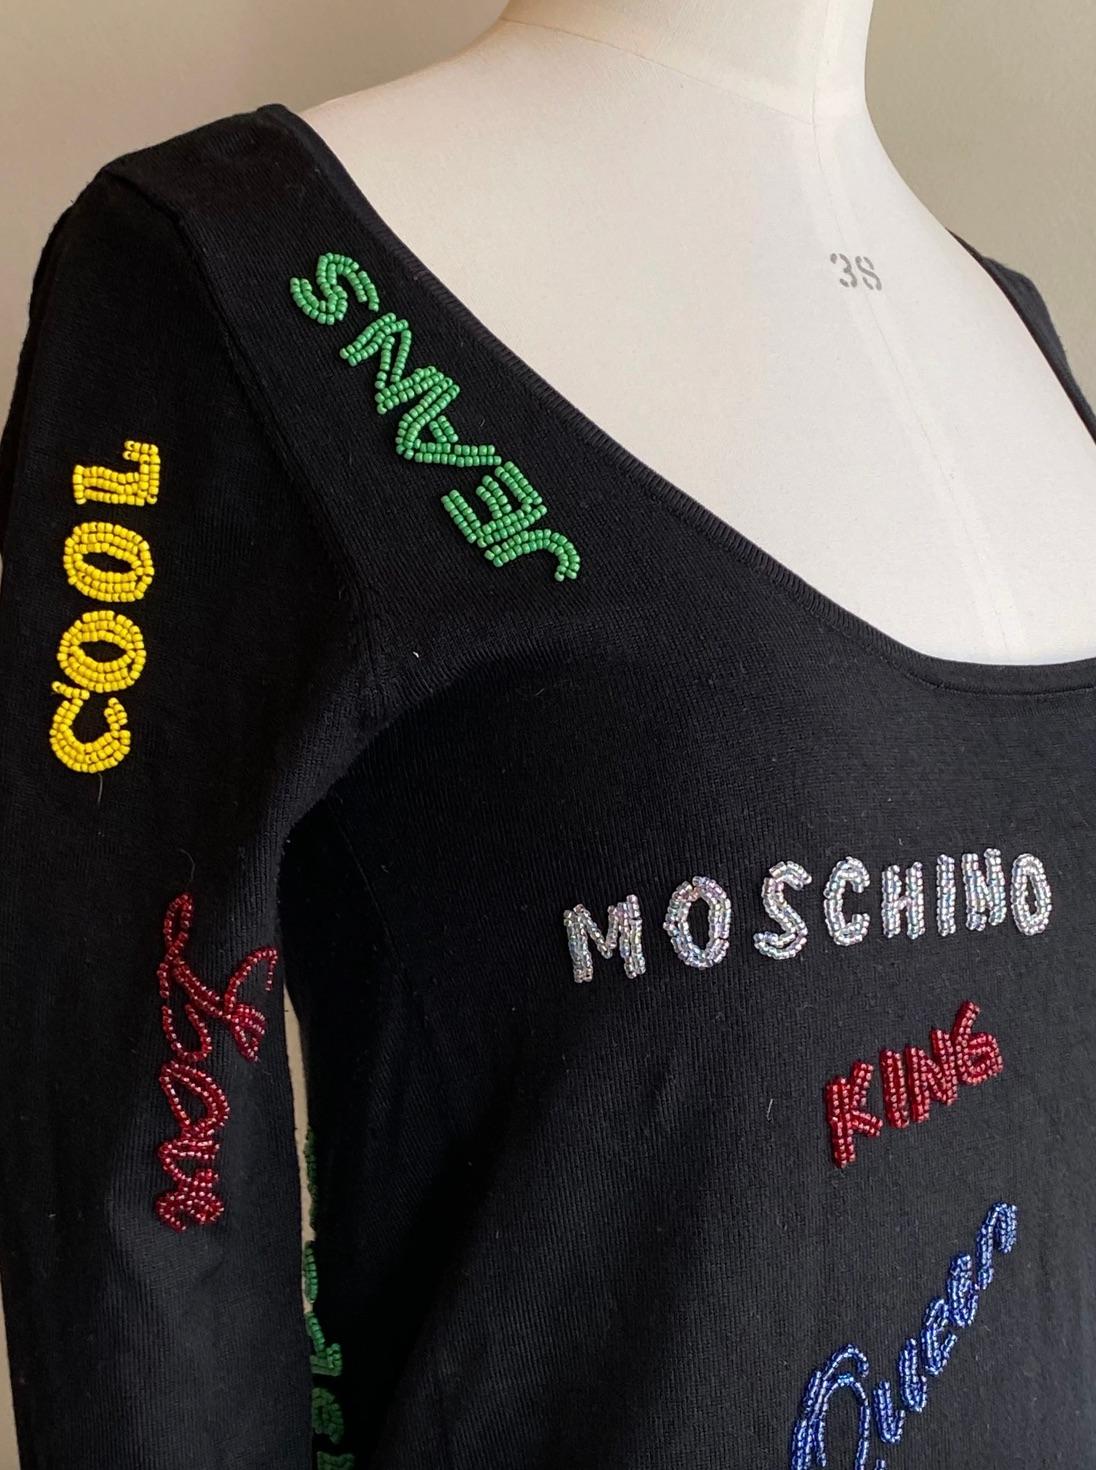 Beaded Silk Moschino Jeans Top In Good Condition For Sale In Glasgow, GB